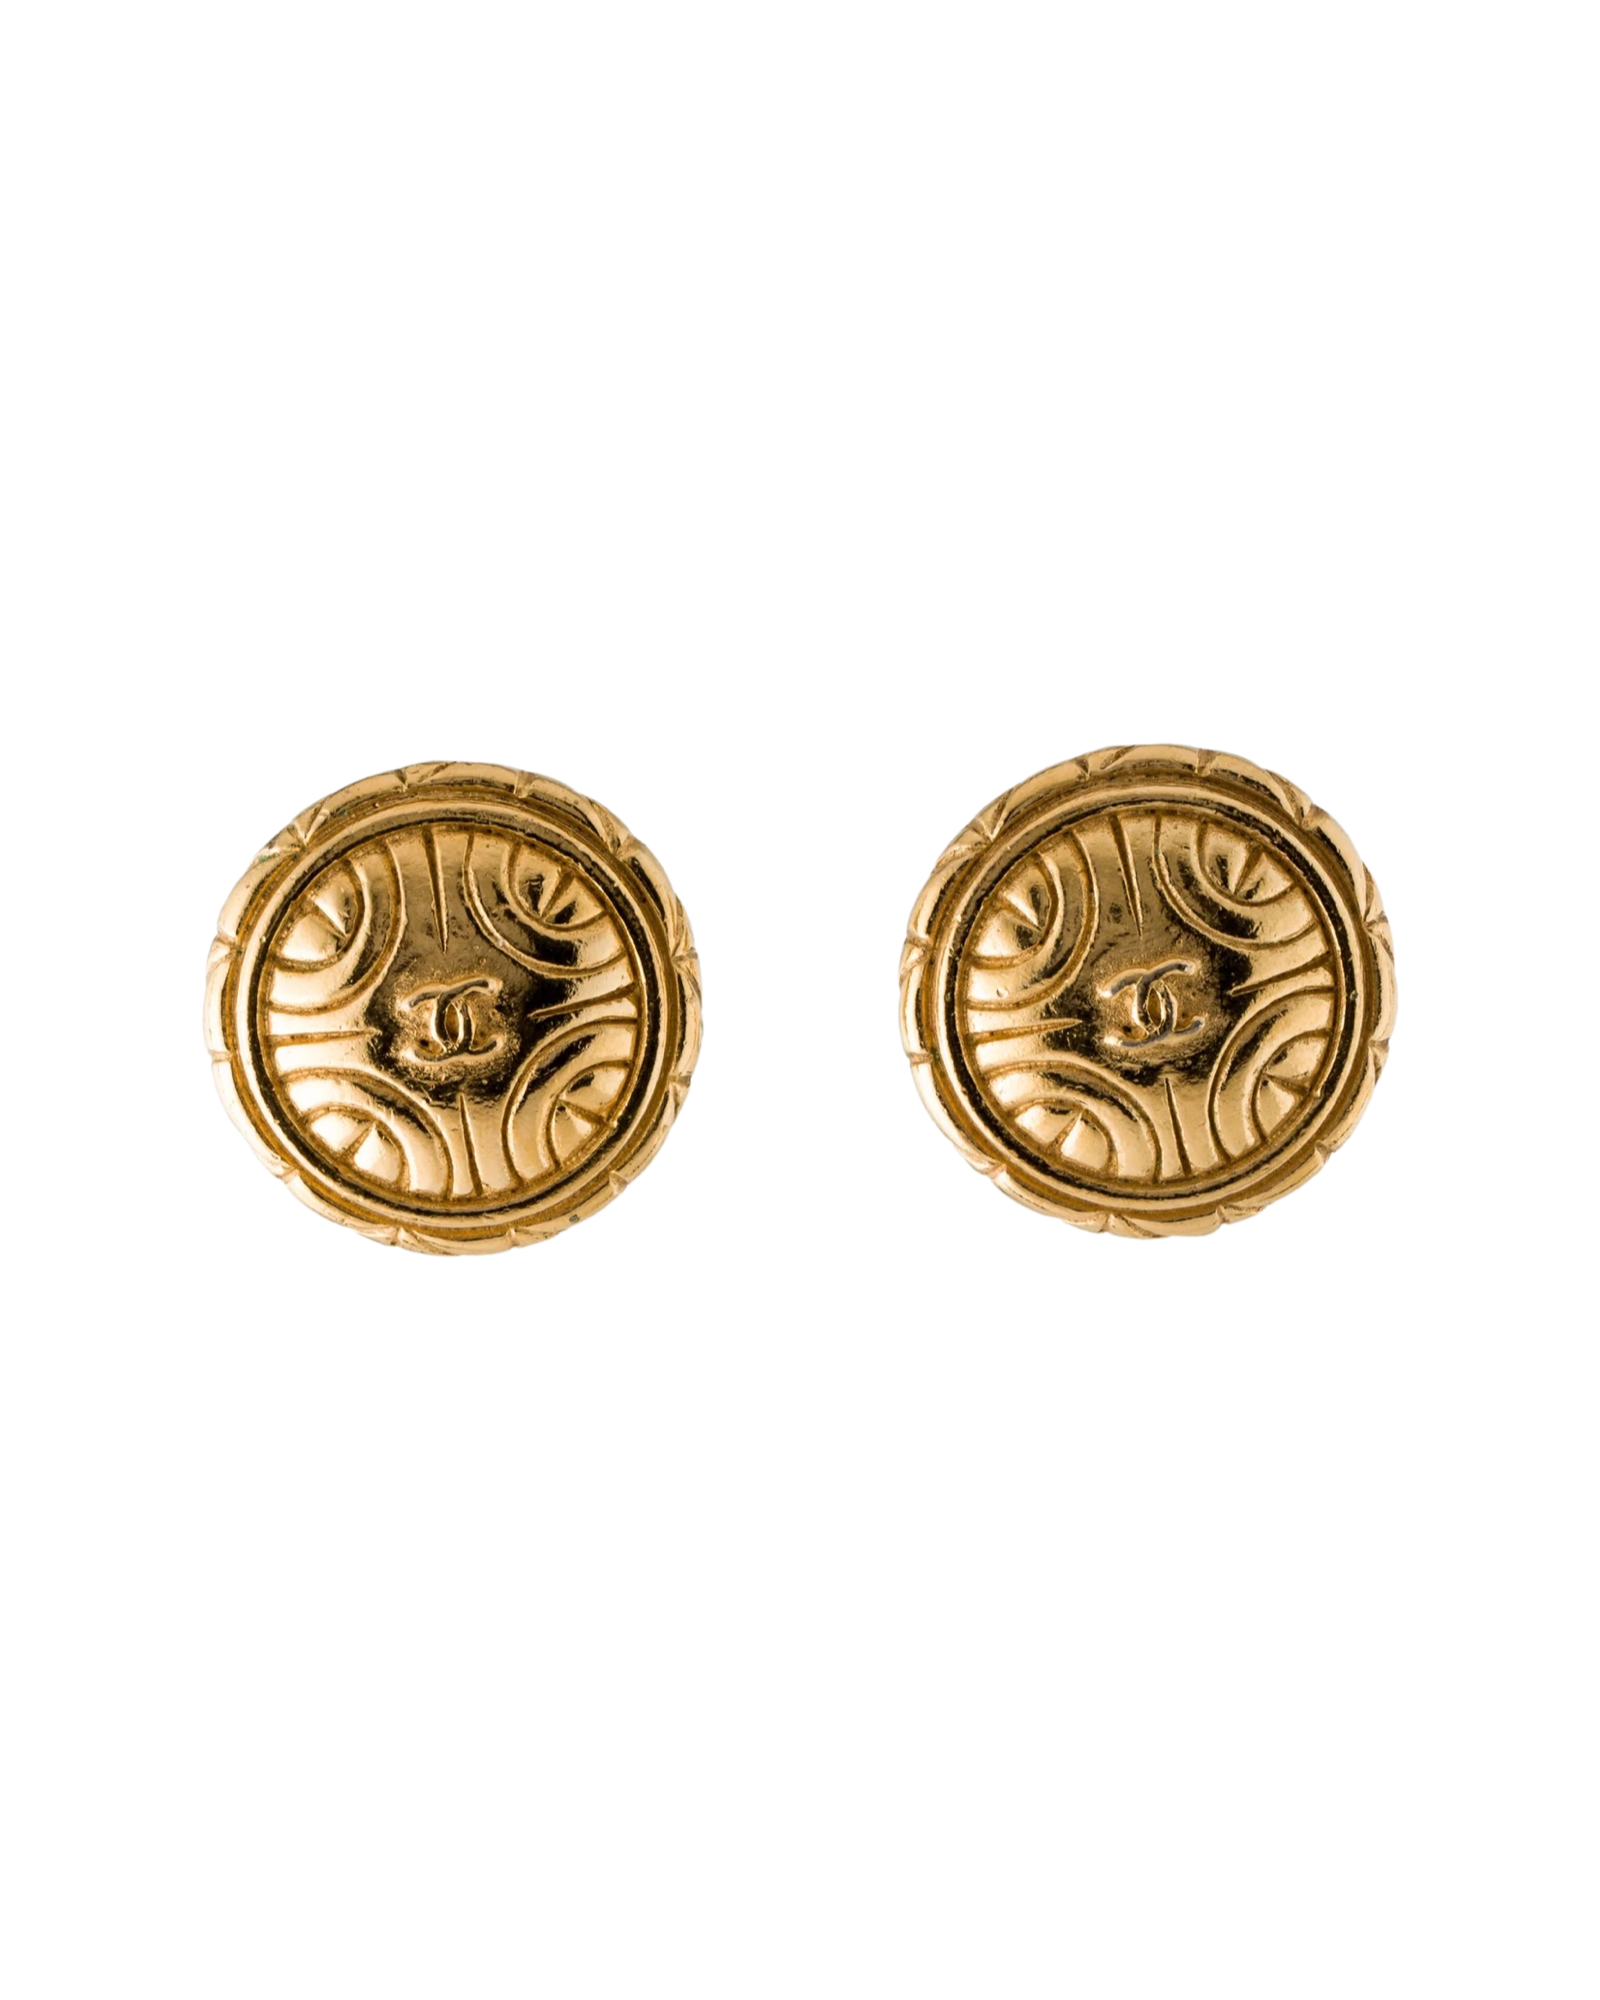 Chanel Vintage CC Button Clip-On Earrings